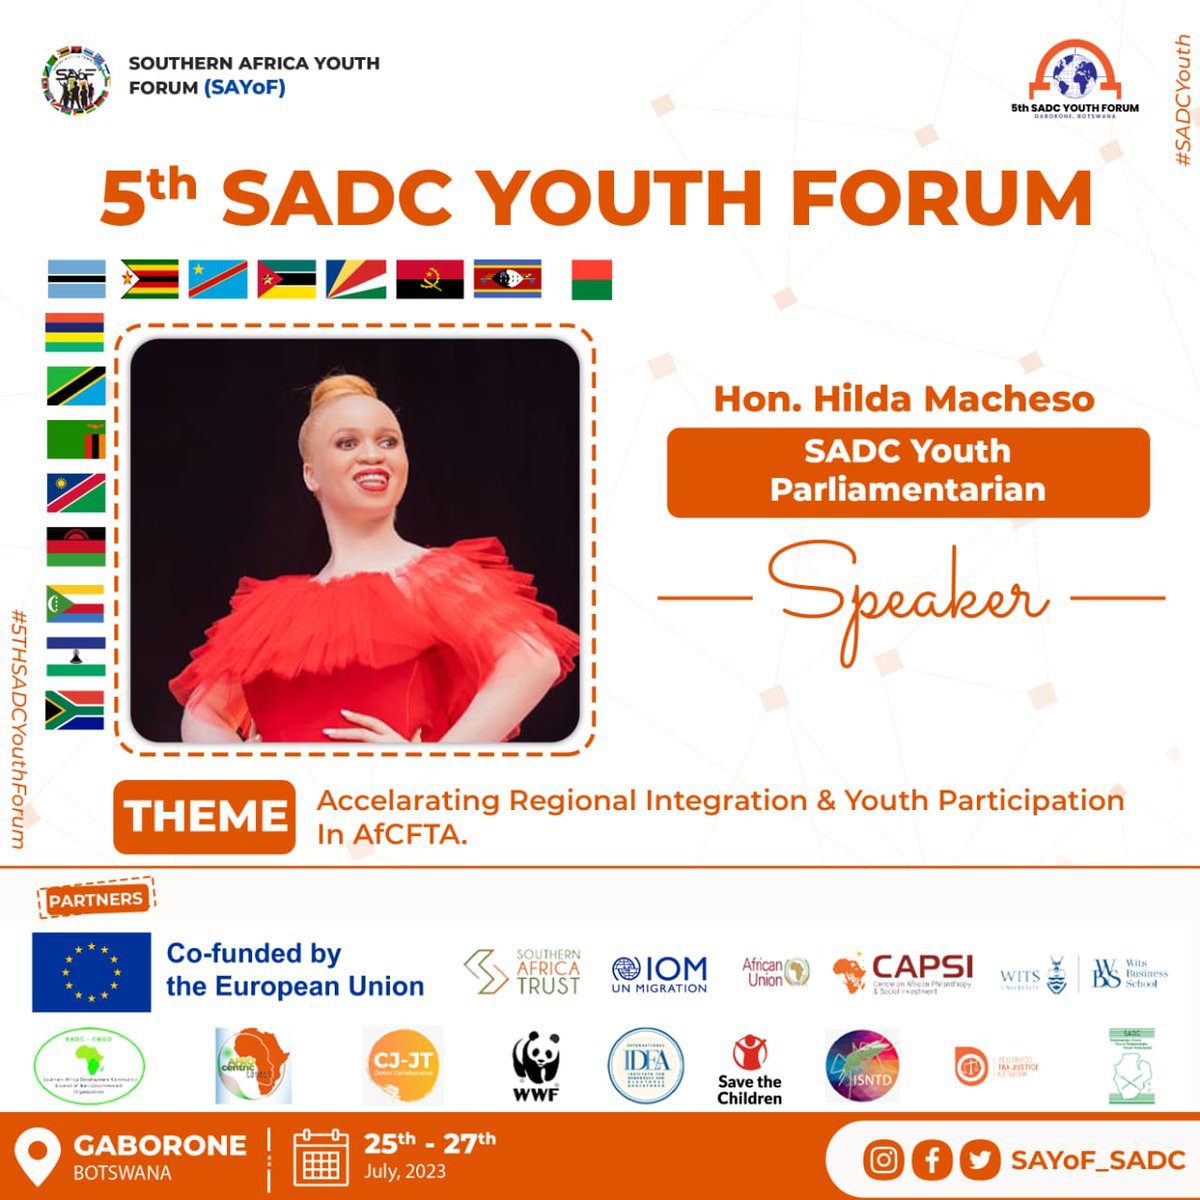 Hon. Hilda Macheso have successfully launched the SADC Network for Albinism Organisations, which will be running under the Disability Cluster. #PWDsMatter 
#SADCYouth #5thSADCYouthForum